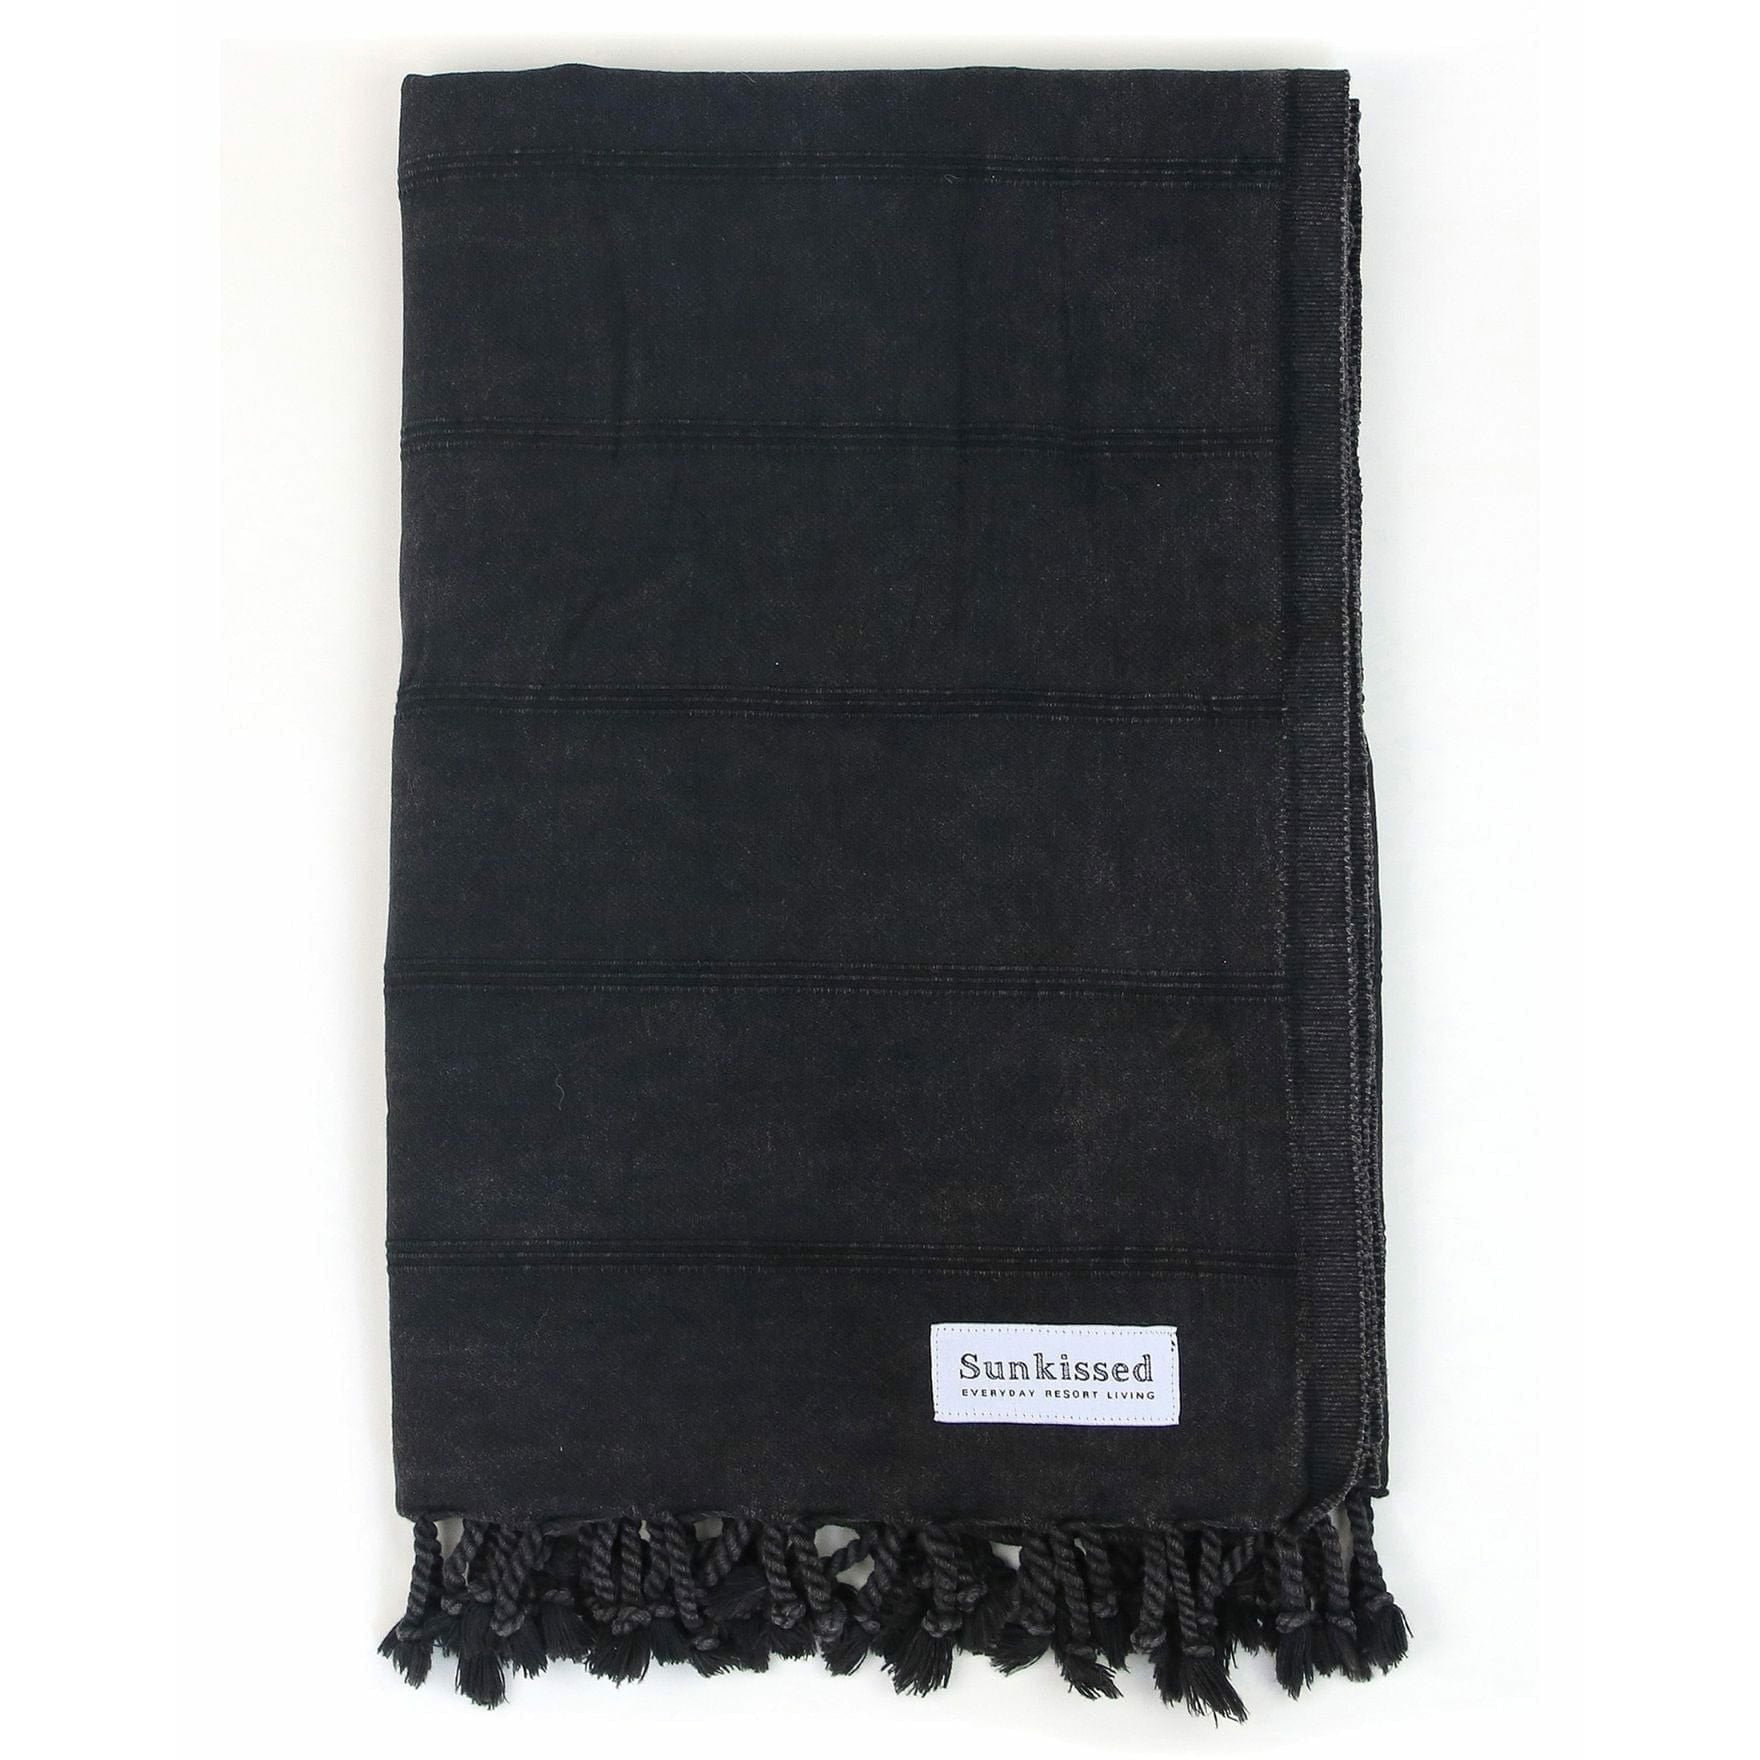 Sunkissed Charcoal / L • 100cm x 180cm • 40"W x 72"L Bali • Sand Free Beach Towel by Sunkissed